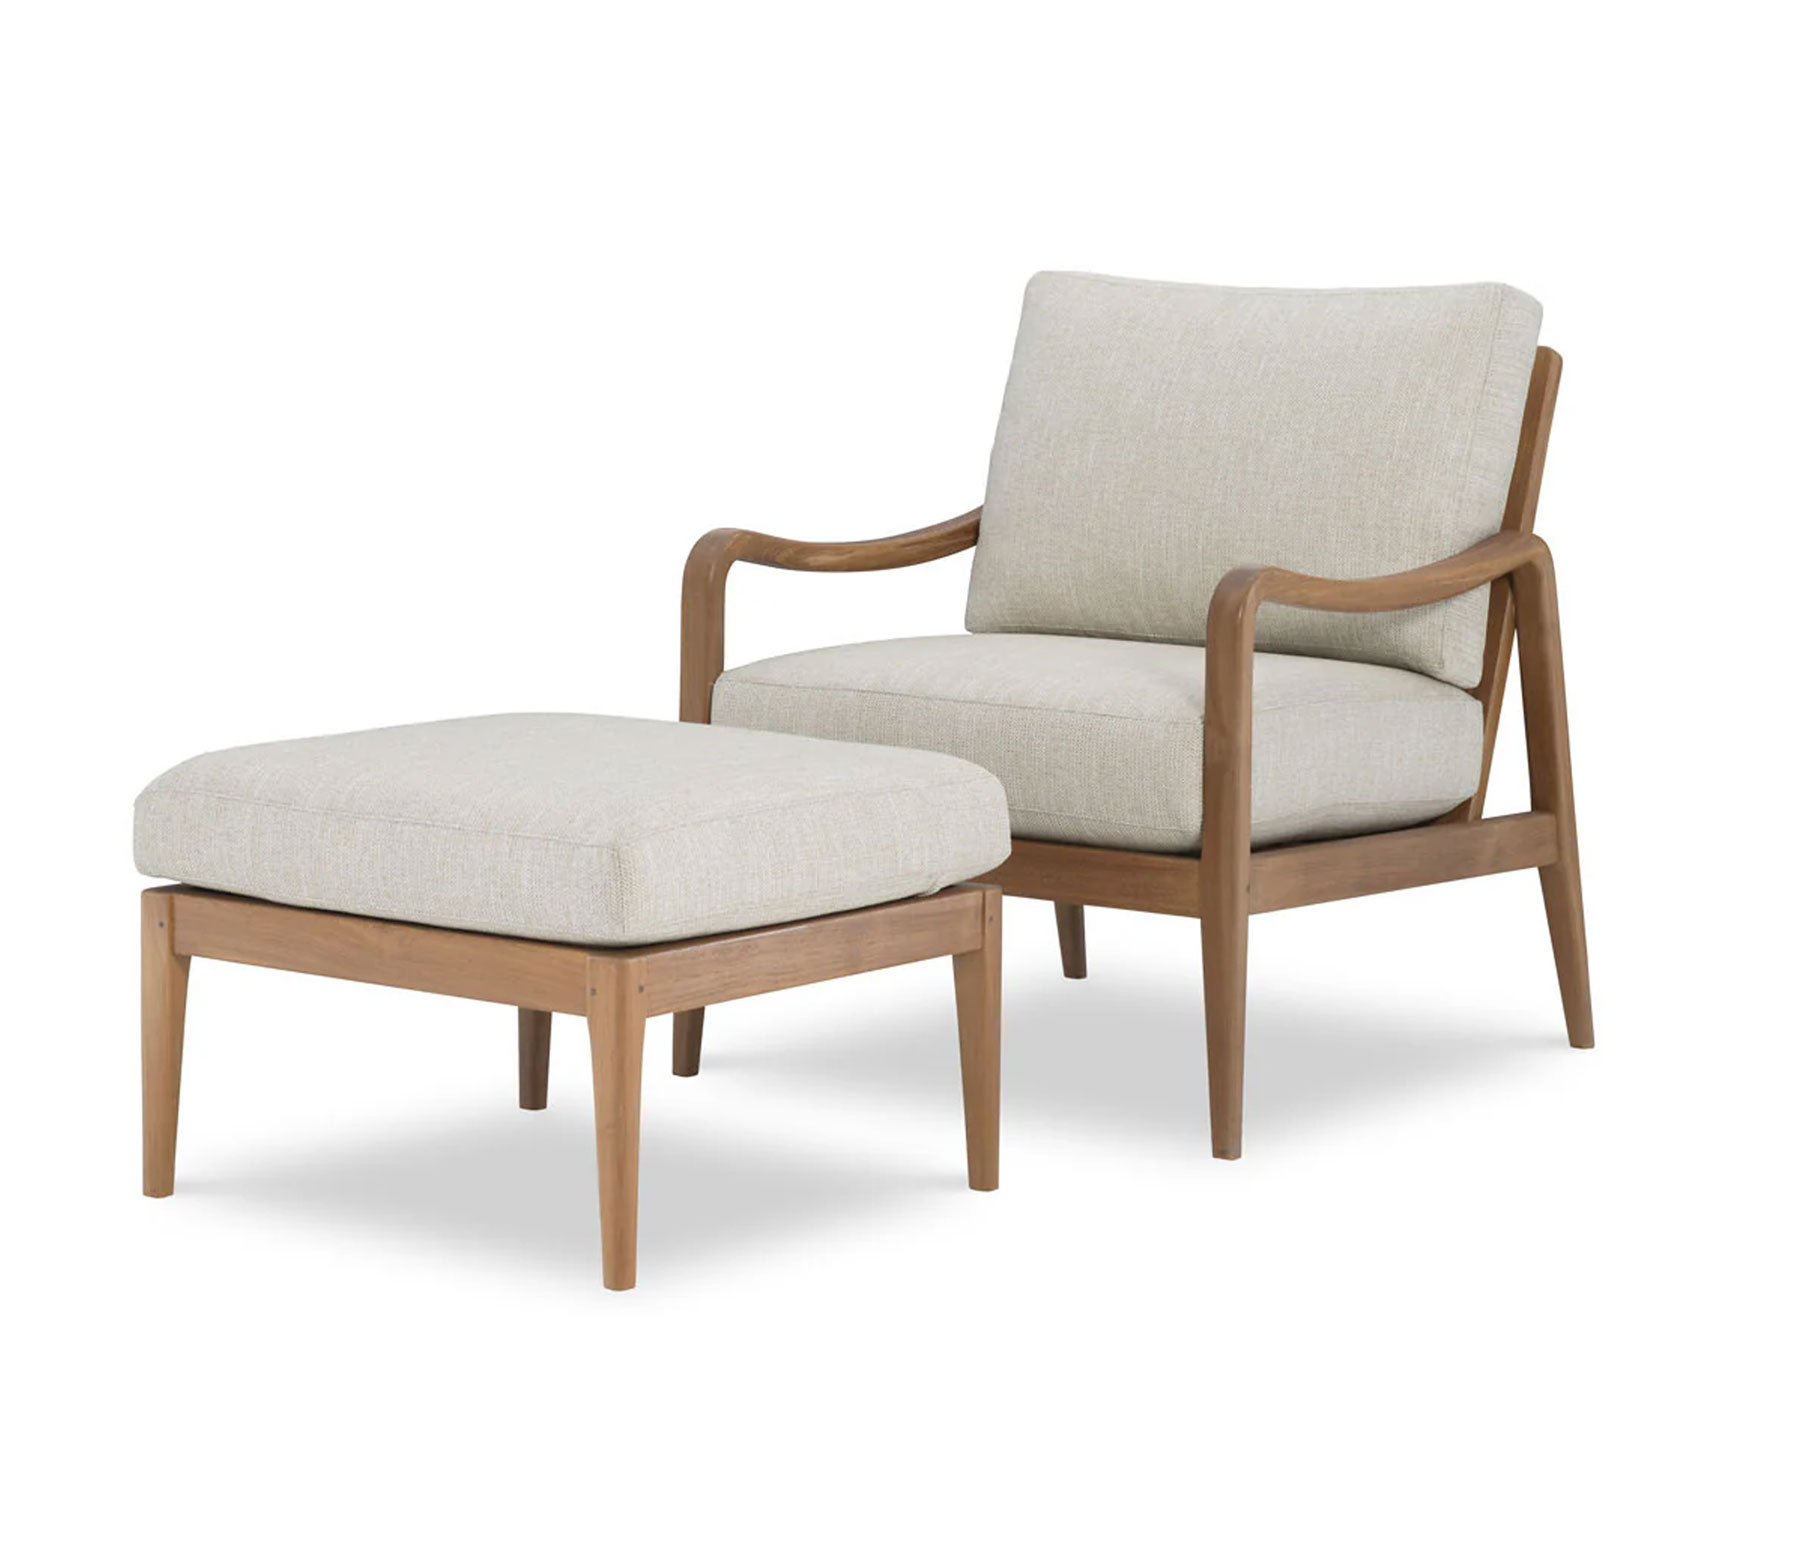 Wesley Hall 2533 Herring Chair and Ottoman in C-Rollo Mink Fabric